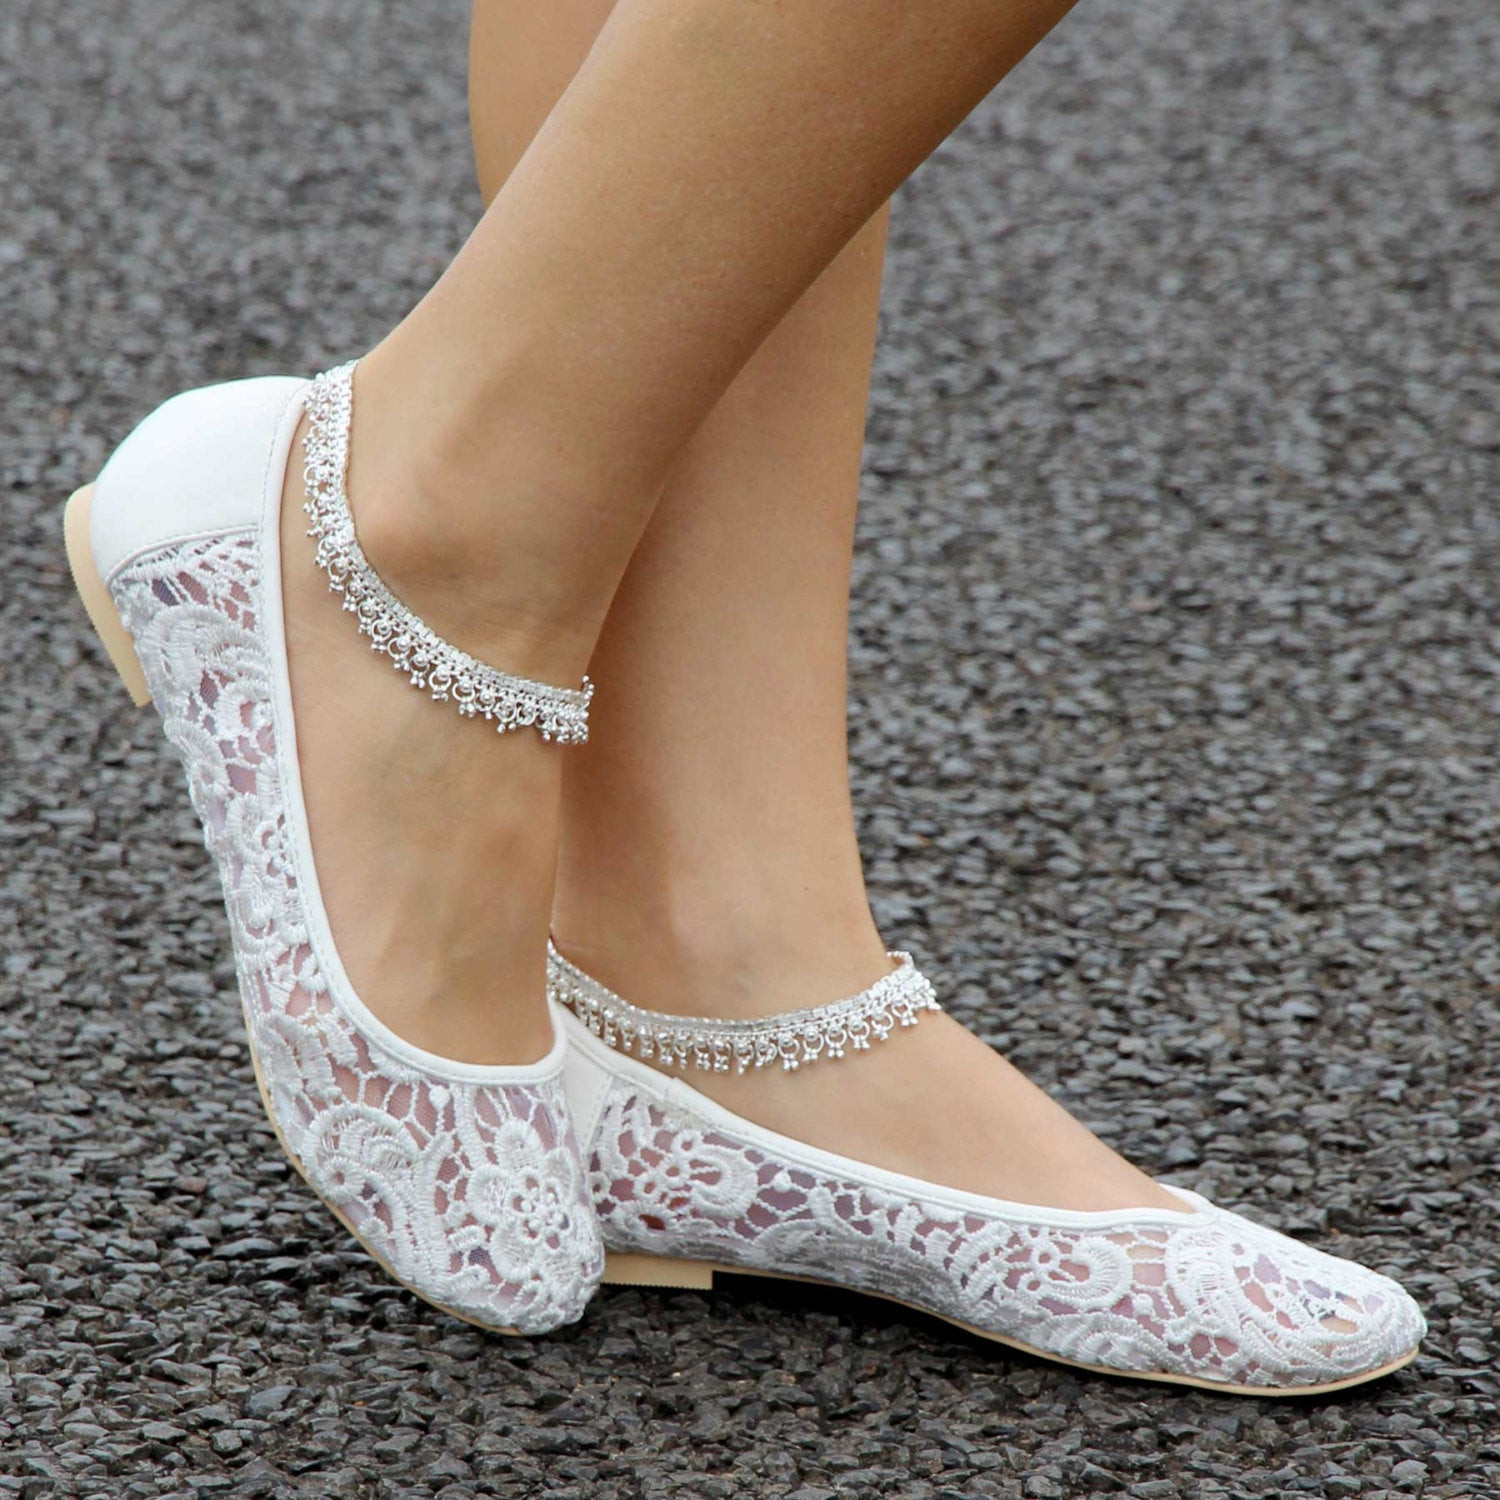 Ballet Flat Wedding Shoes
 Unavailable Listing on Etsy